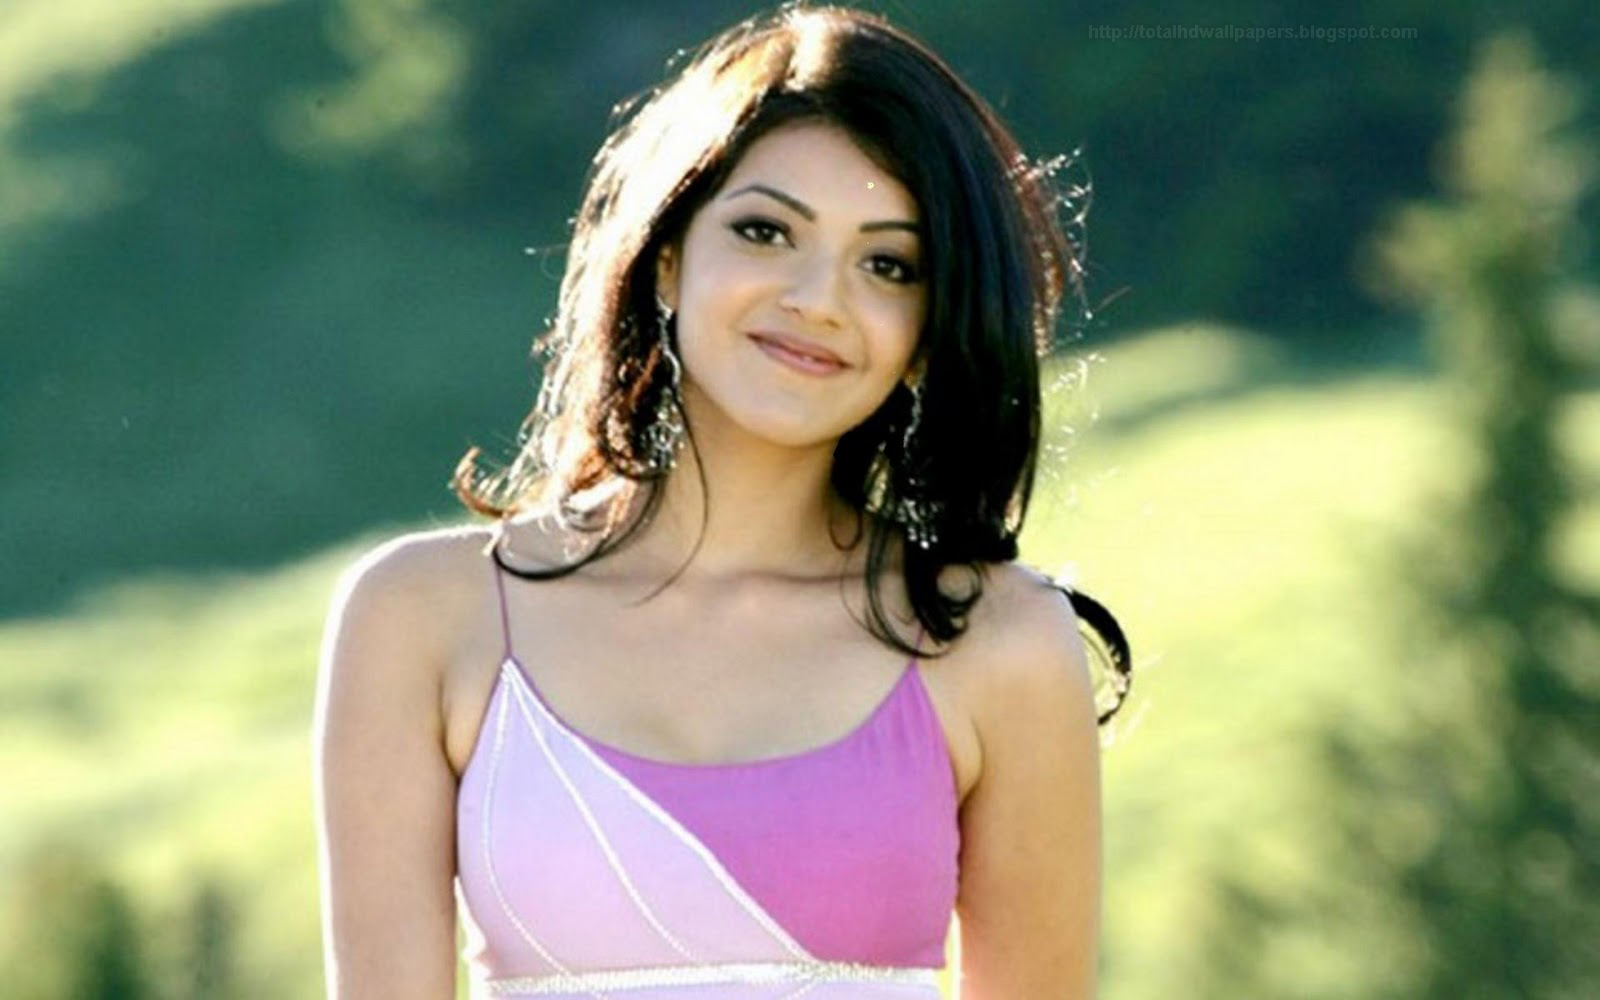 Latest Bollywood Wallpapers Bollywood Actress HD Wallpapers 1080p 1600x1000